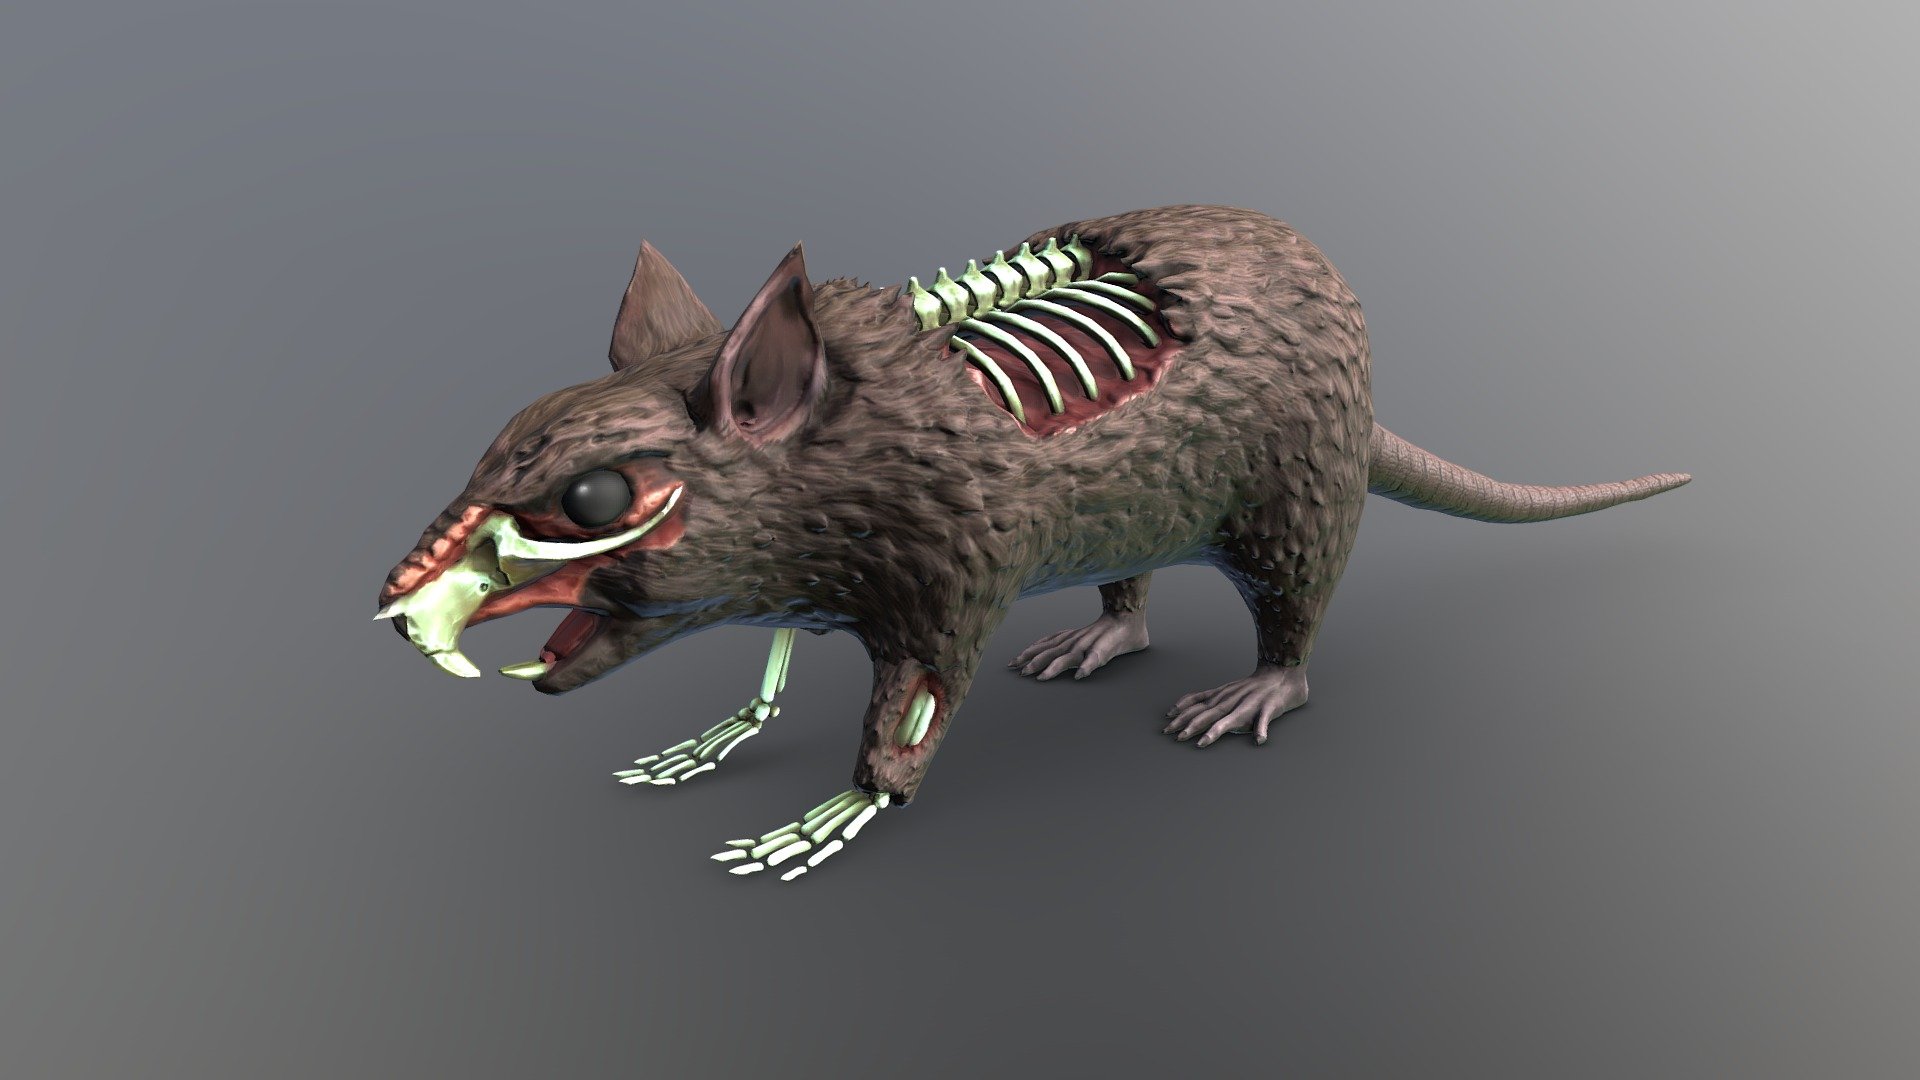 Created this for a freelance project along with a few other rat variations.

Plagued Rat: https://skfb.ly/6MLCp
Regular Rat: https://skfb.ly/6MLAL - Undead Rat - 3D model by MMKH 3d model